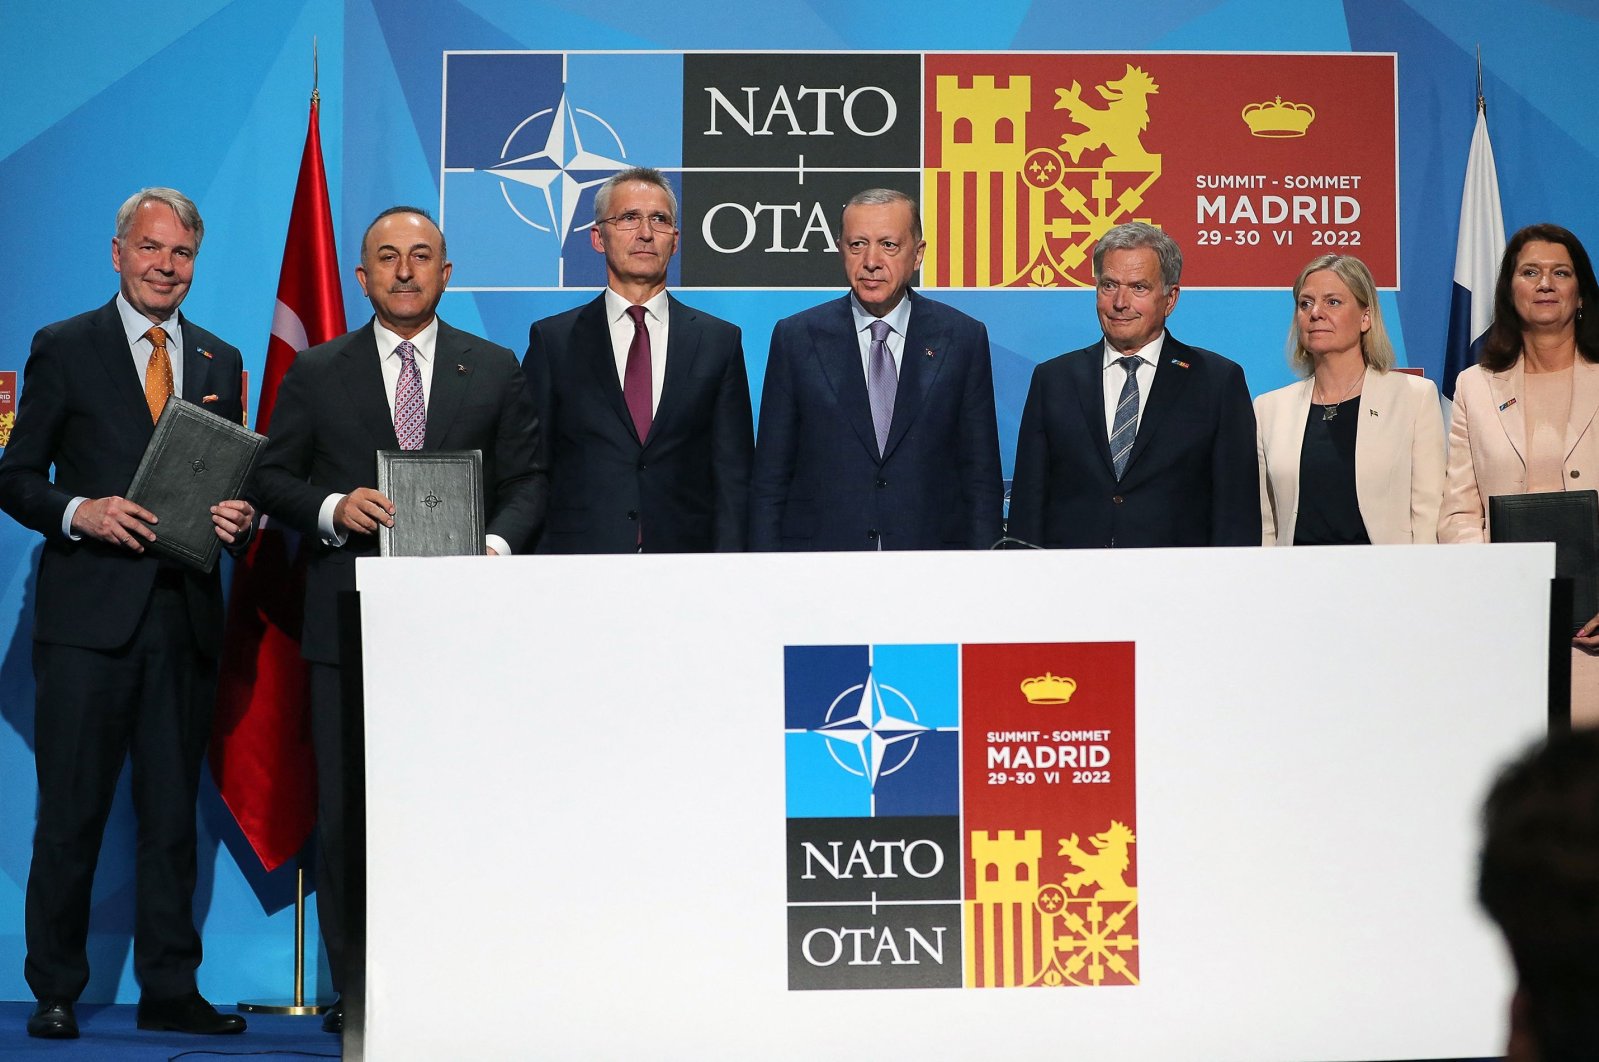 This handout photograph taken and released on June 28, 2022, in Madrid by the Turkish Presidential press office shows (From L) Finnish Foreign Minister Pekka Haavisto, Turkish Foreign Minister Mevlüt Çavuşoğlu, NATO Secretary-General Jens Stoltenberg, President Recep Tayyip Erdoğan, Finland&#039;s President Sauli Niinisto, Sweden&#039;s Prime Minister Magdalena Andersson and Swedish Foreign Minister Ann Linde posing for pictures after signing a memorandum during a NATO summit in Madrid, Spain. (AFP Photo)